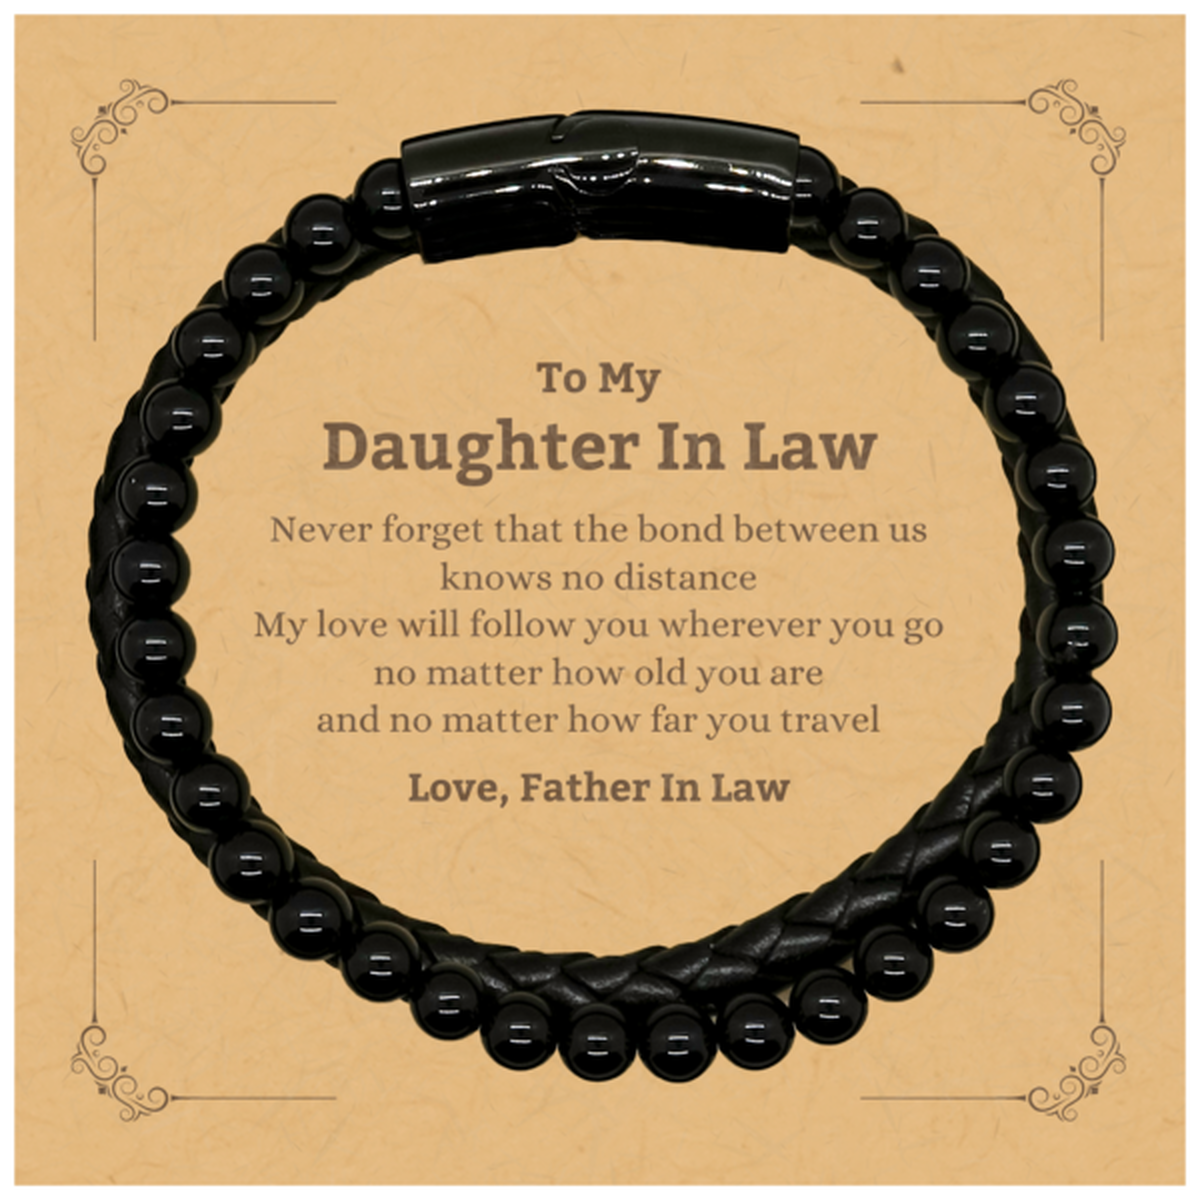 Daughter In Law Birthday Gifts from Father In Law, Adjustable Stone Leather Bracelets for Daughter In Law Christmas Graduation Unique Gifts Daughter In Law Never forget that the bond between us knows no distance. Love, Father In Law